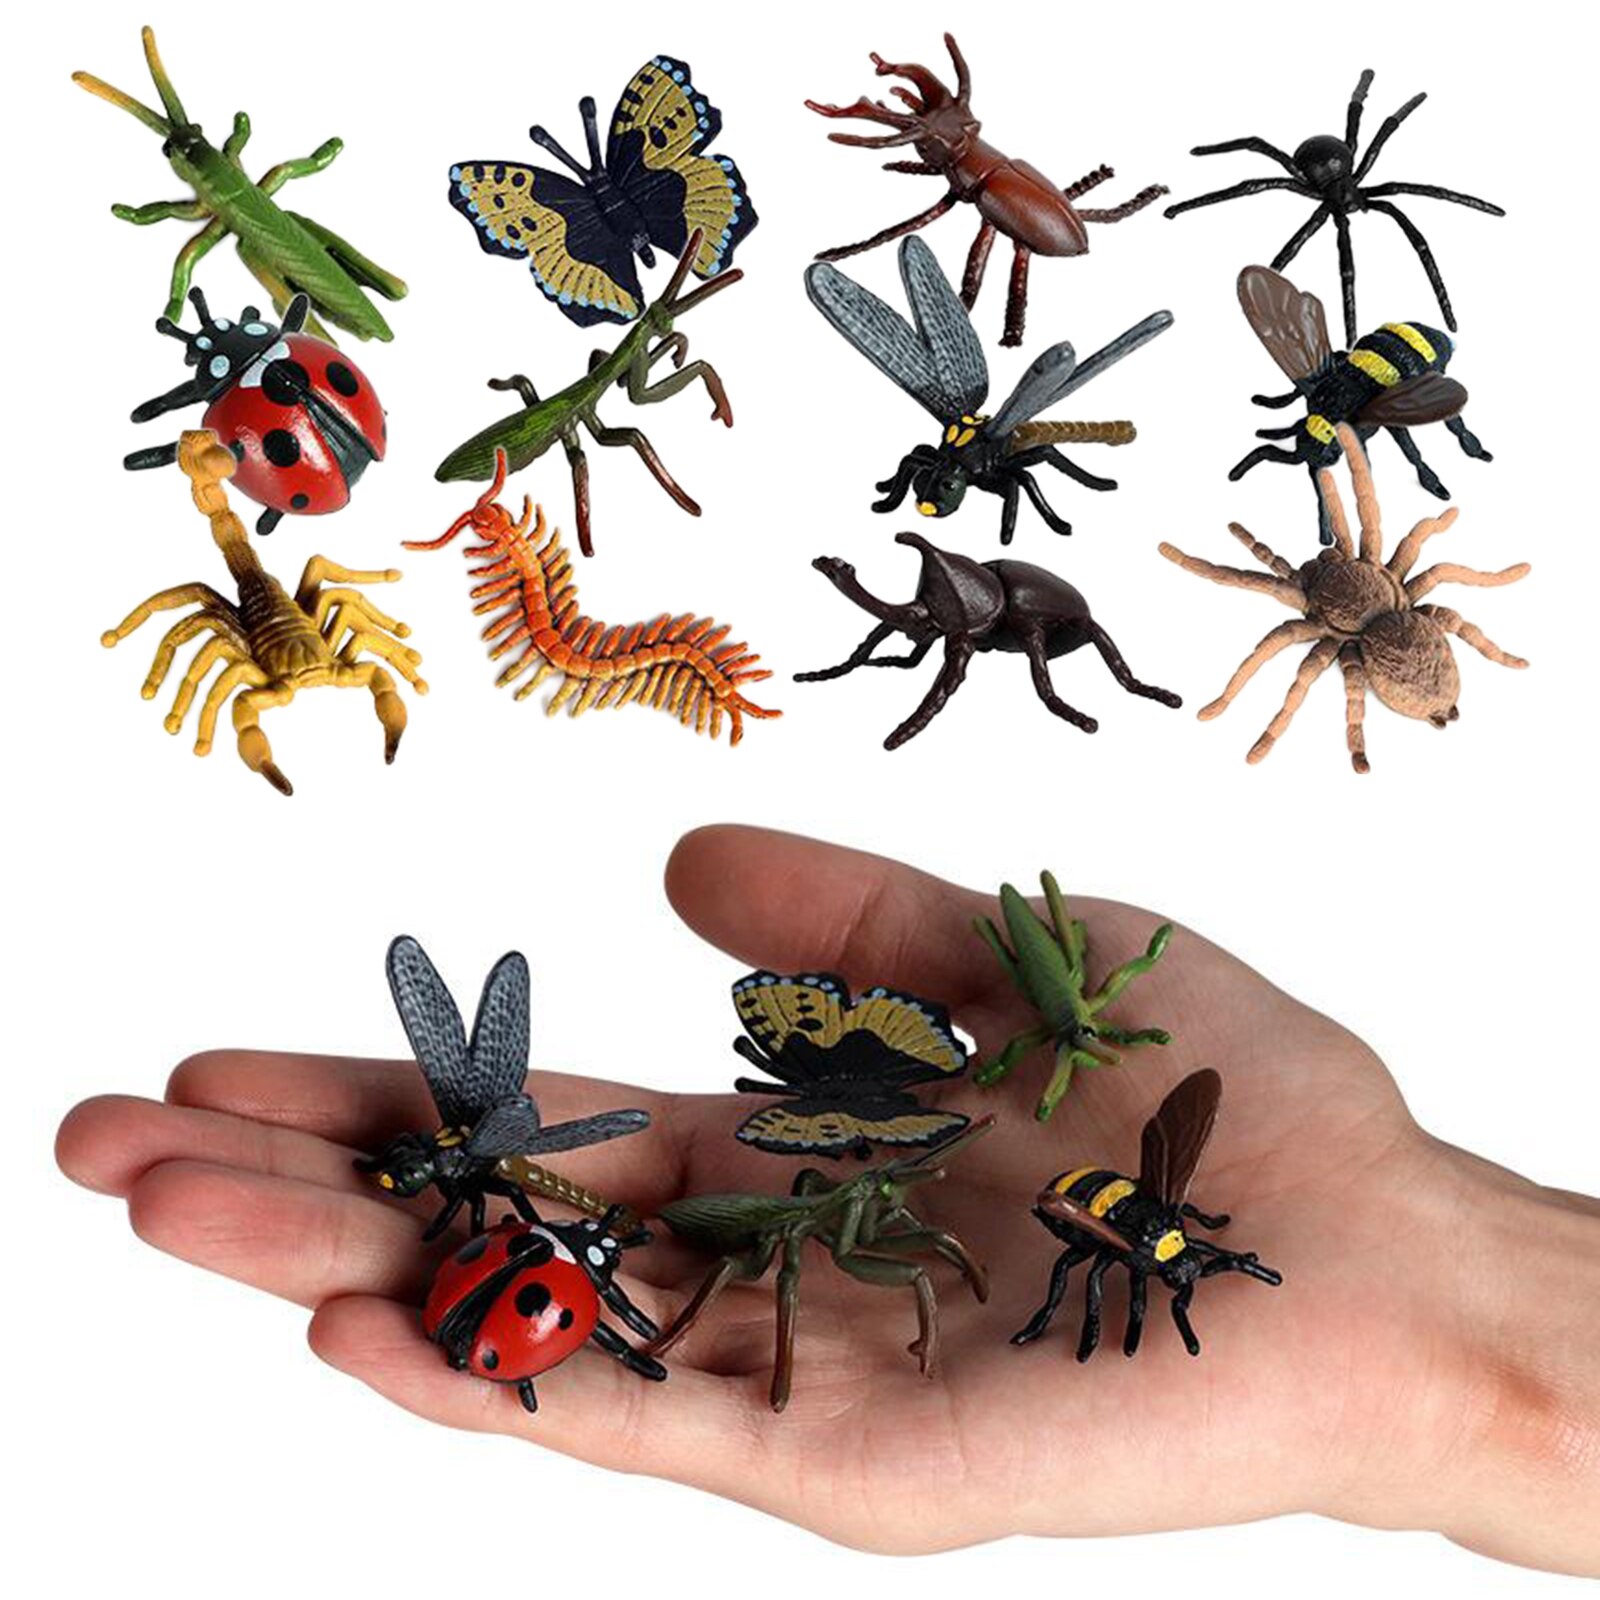 12 Pack Plastic Insect Figures Assorted Insect Bugs Lifelike Figurines for Children Education, Insect Themed Party